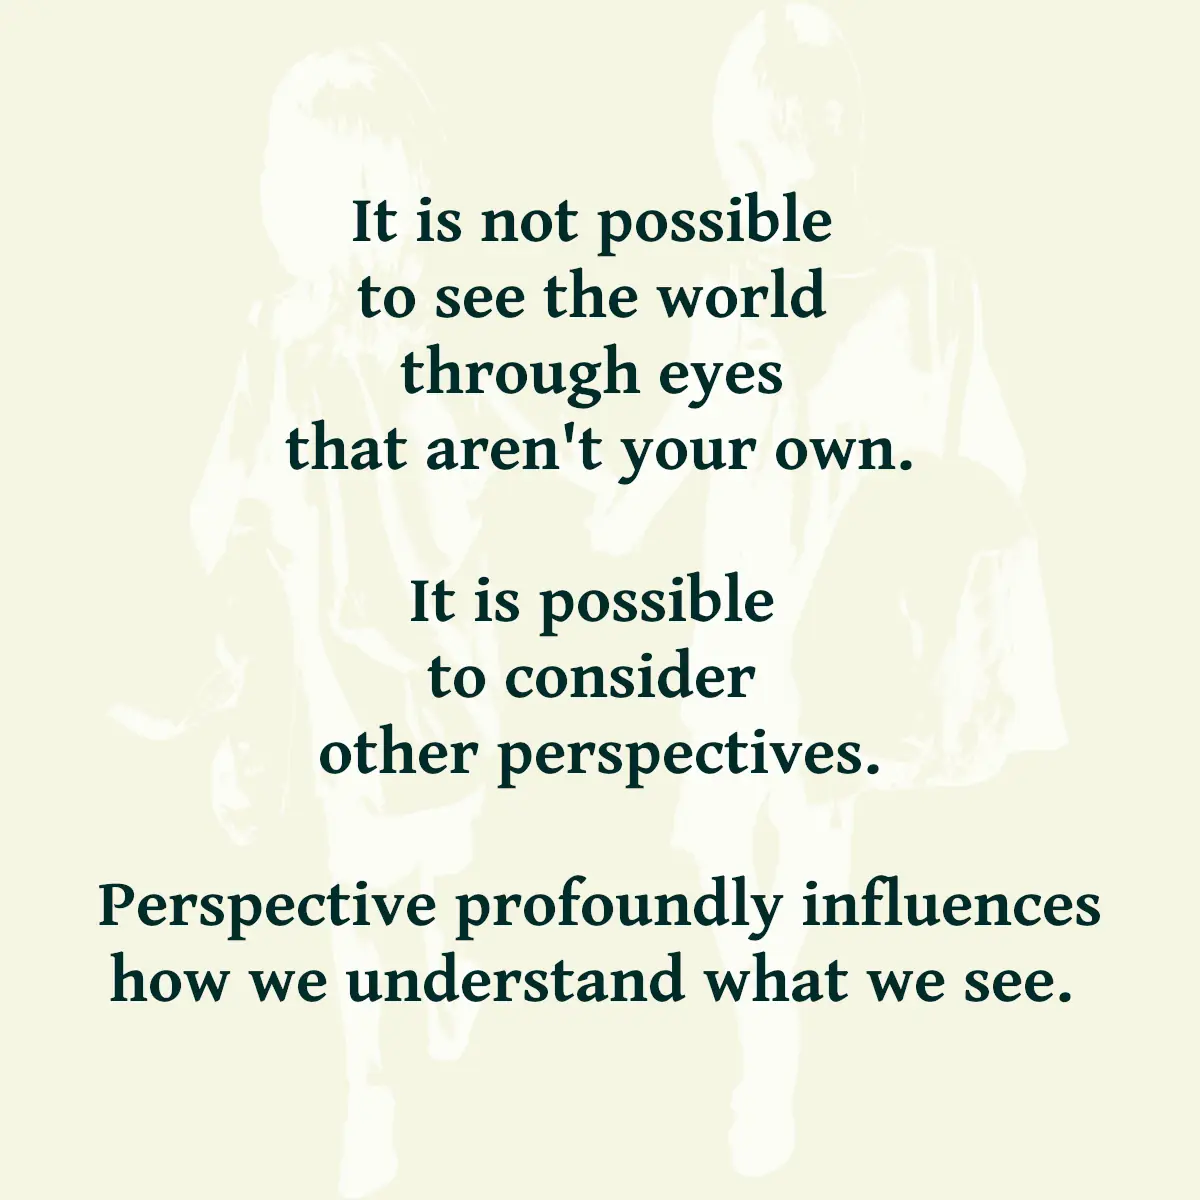 Text reading: It is not possible to see the world through eyes that aren't your own. It is possible to consider other perspectives. Perspective profoundly influences how we understand what we see.